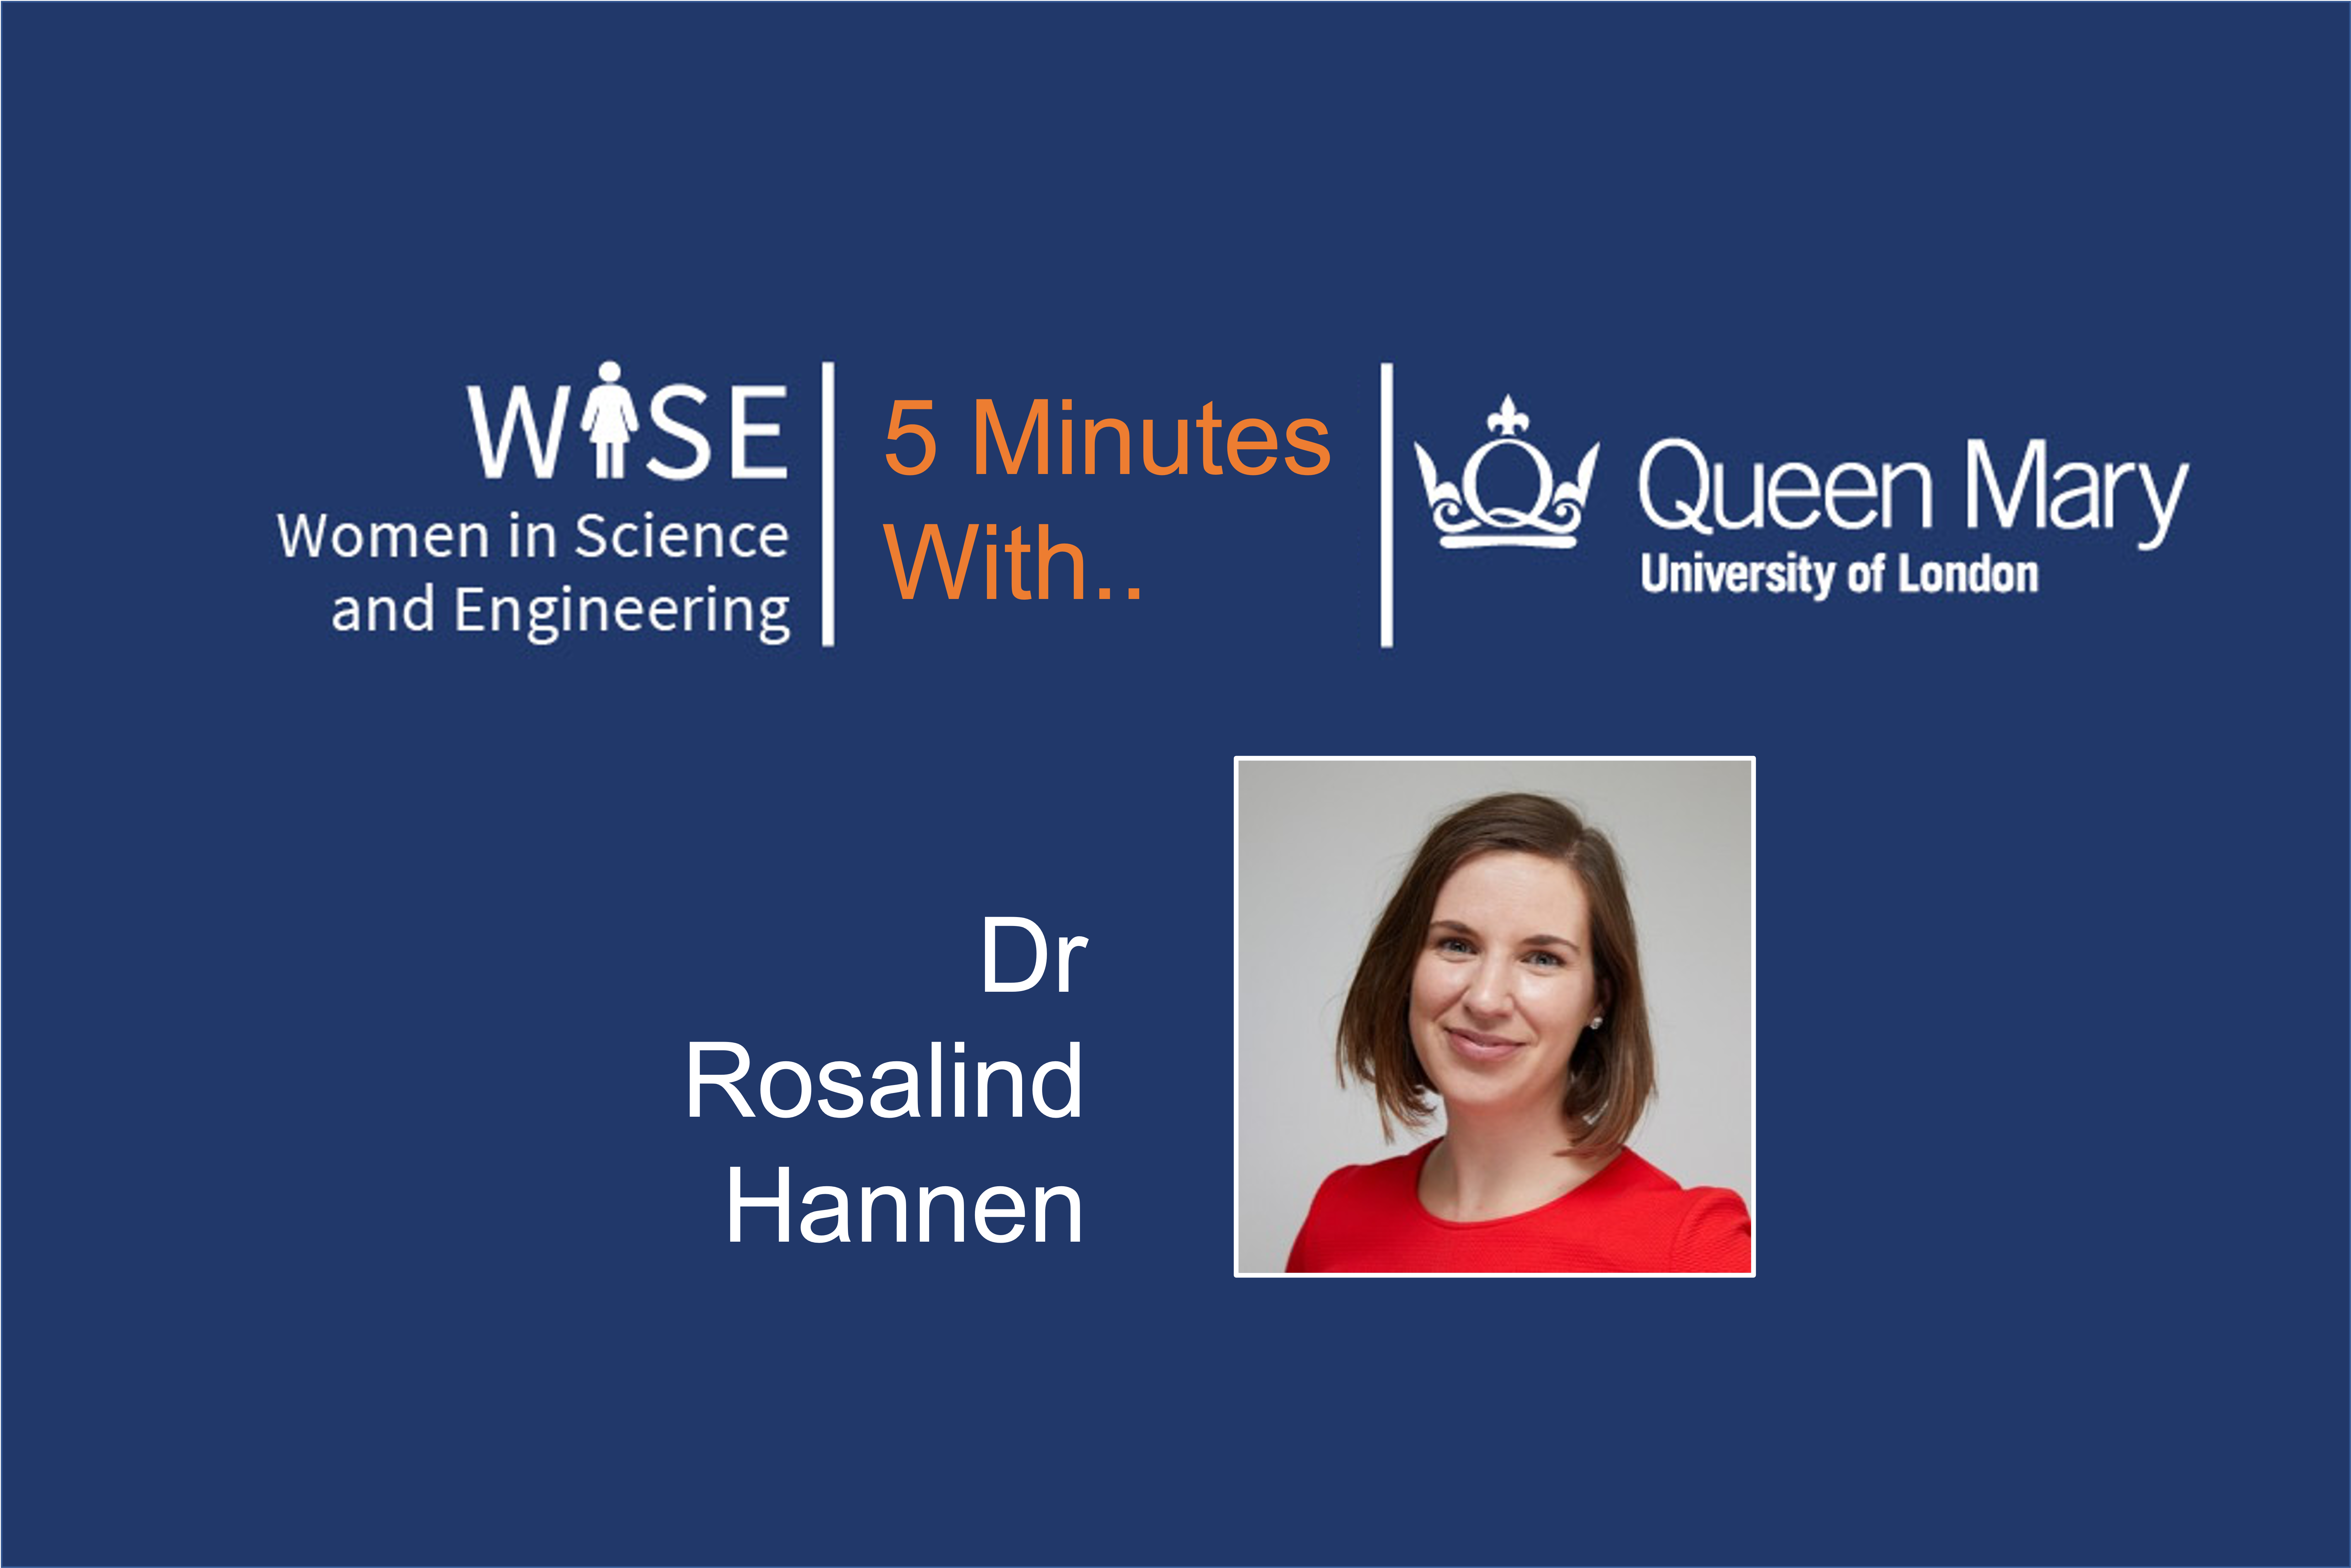 WISE at QMUL presents 5 Minutes With Dr Rosalind Hannen largescale image